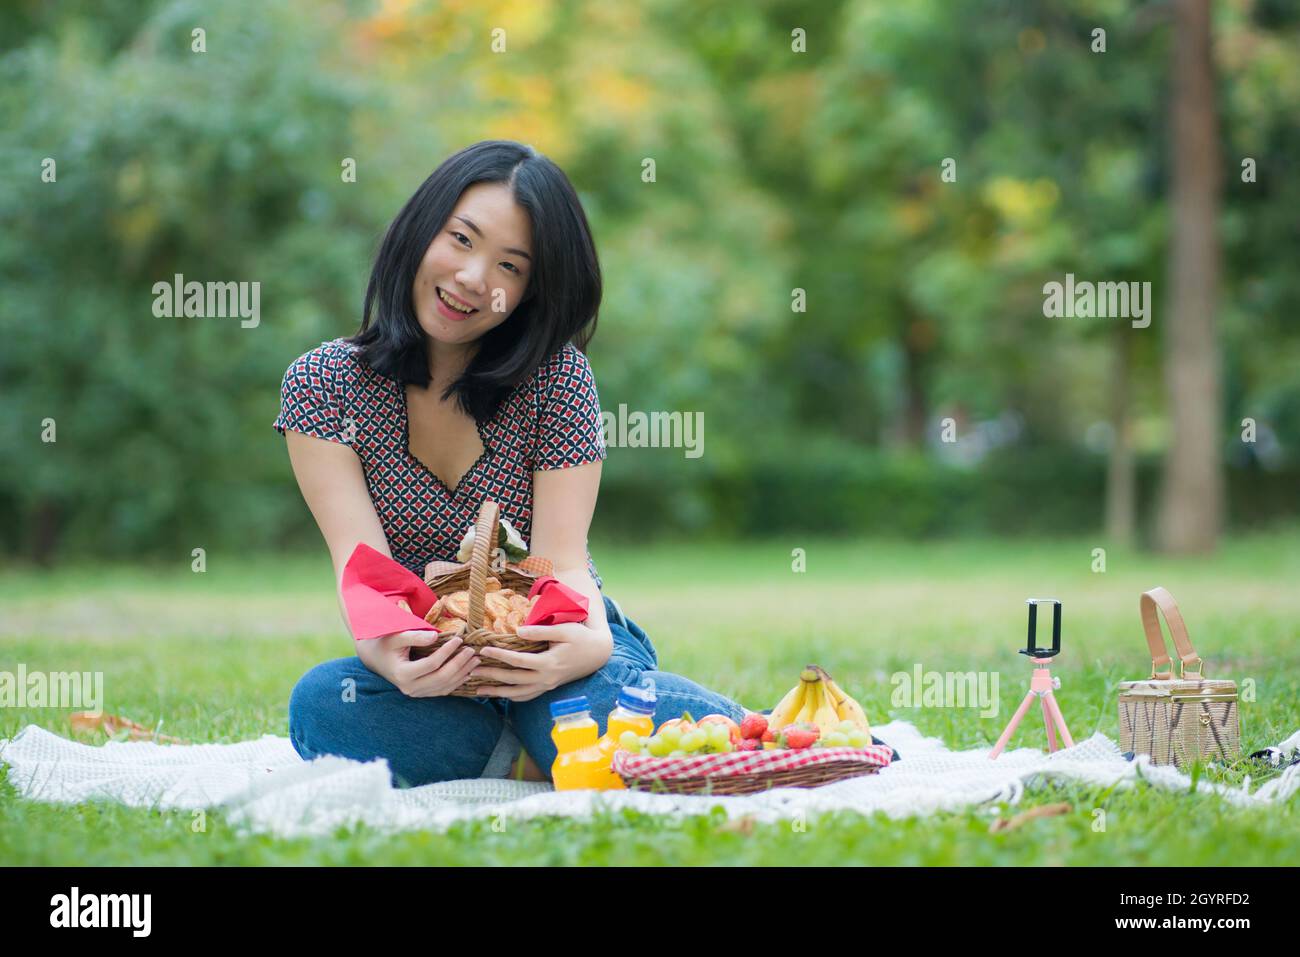 Autumn picnic at city park - lifestyle portrait of young happy and beautiful Asian Korean woman sitting grass with blanket and fruit basket enjoying r Stock Photo